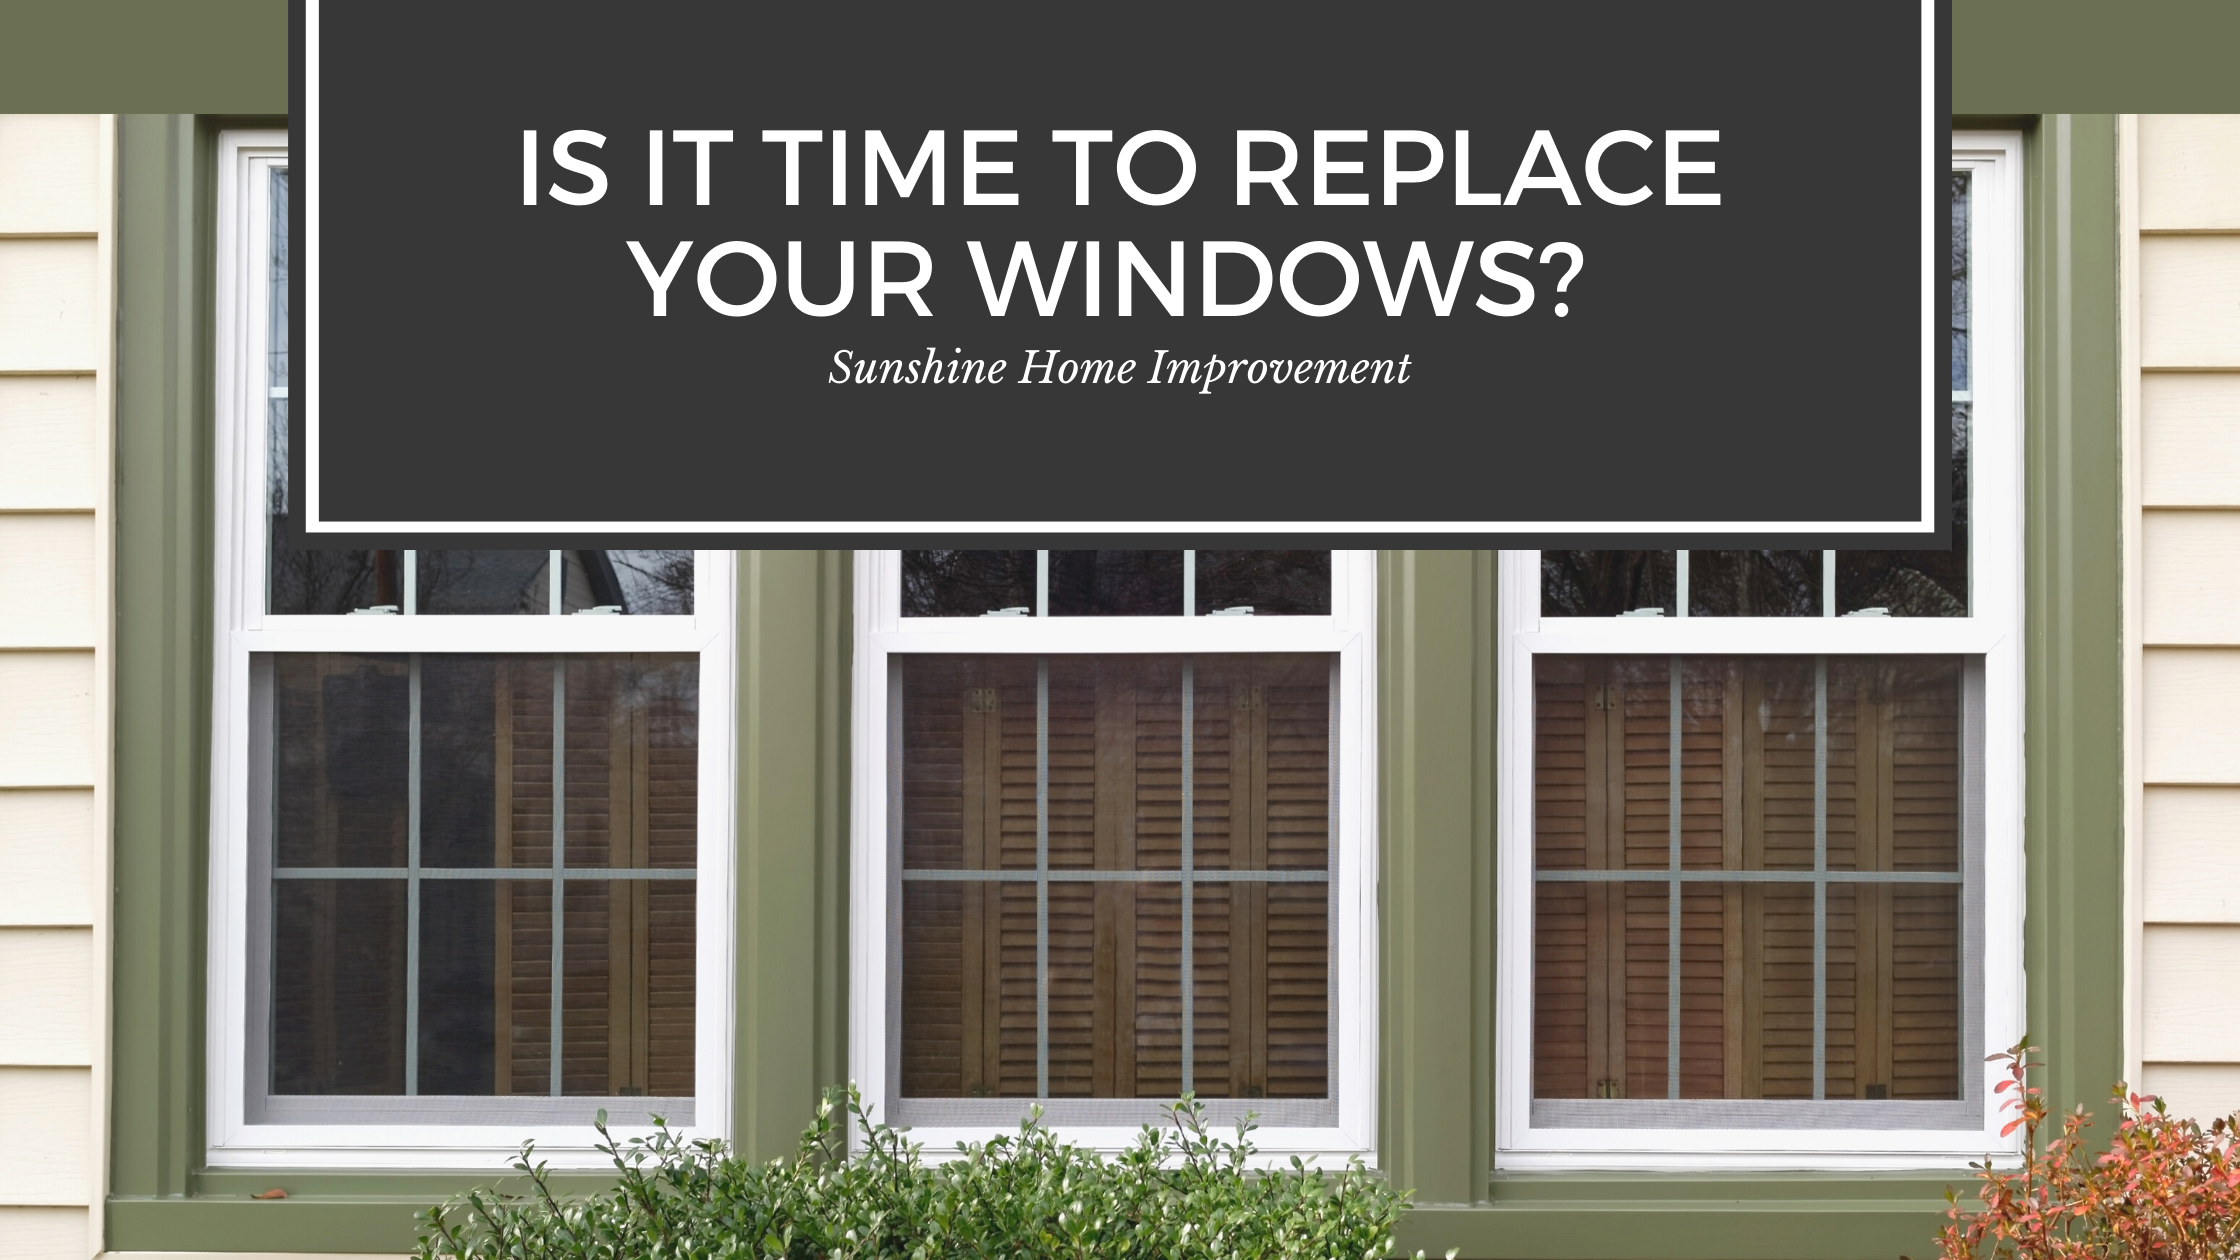 Window Replacement Company in Kansas City | Affordable Windows in Kansas City